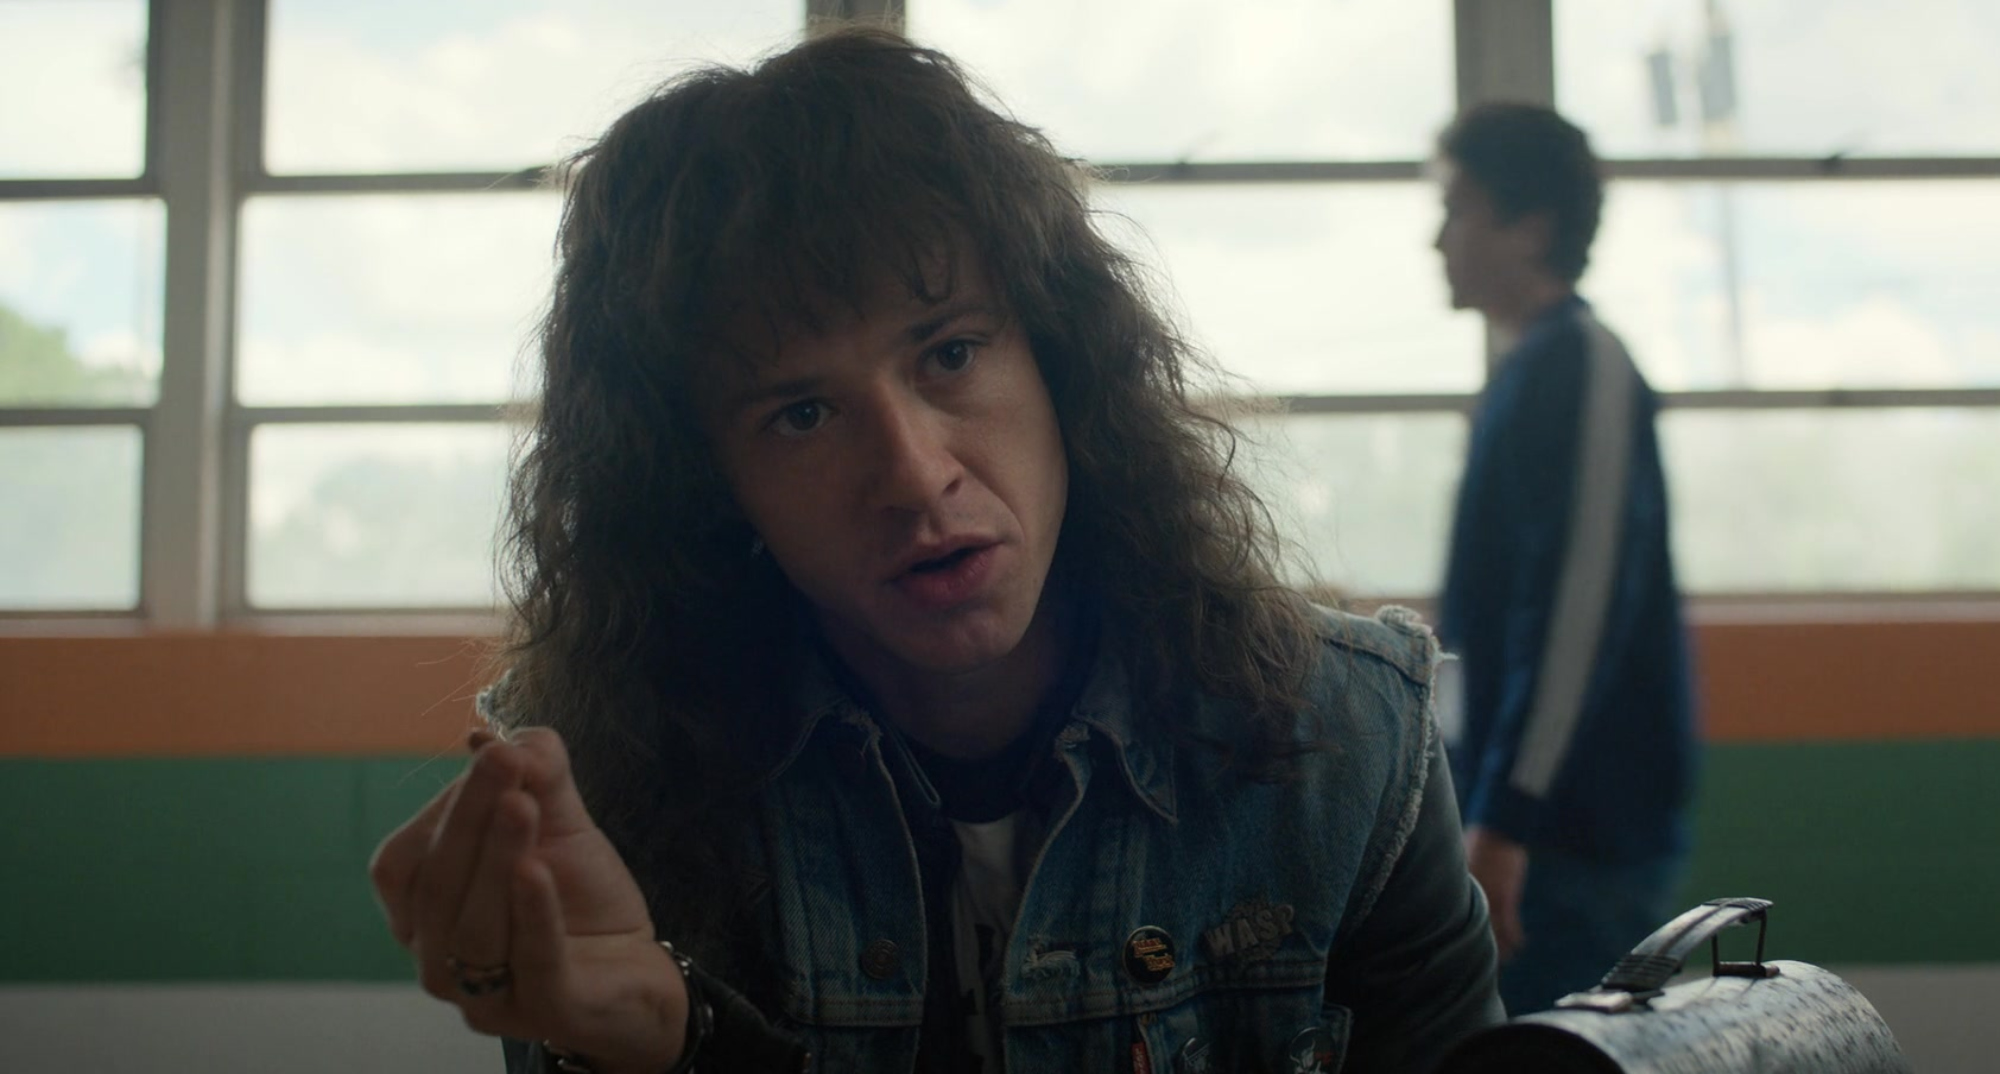 Stranger Things Final Season Confirmed To Have 8 Episodes, Fans Convinced  Eddie Munson Will Return As Kas - FandomWire